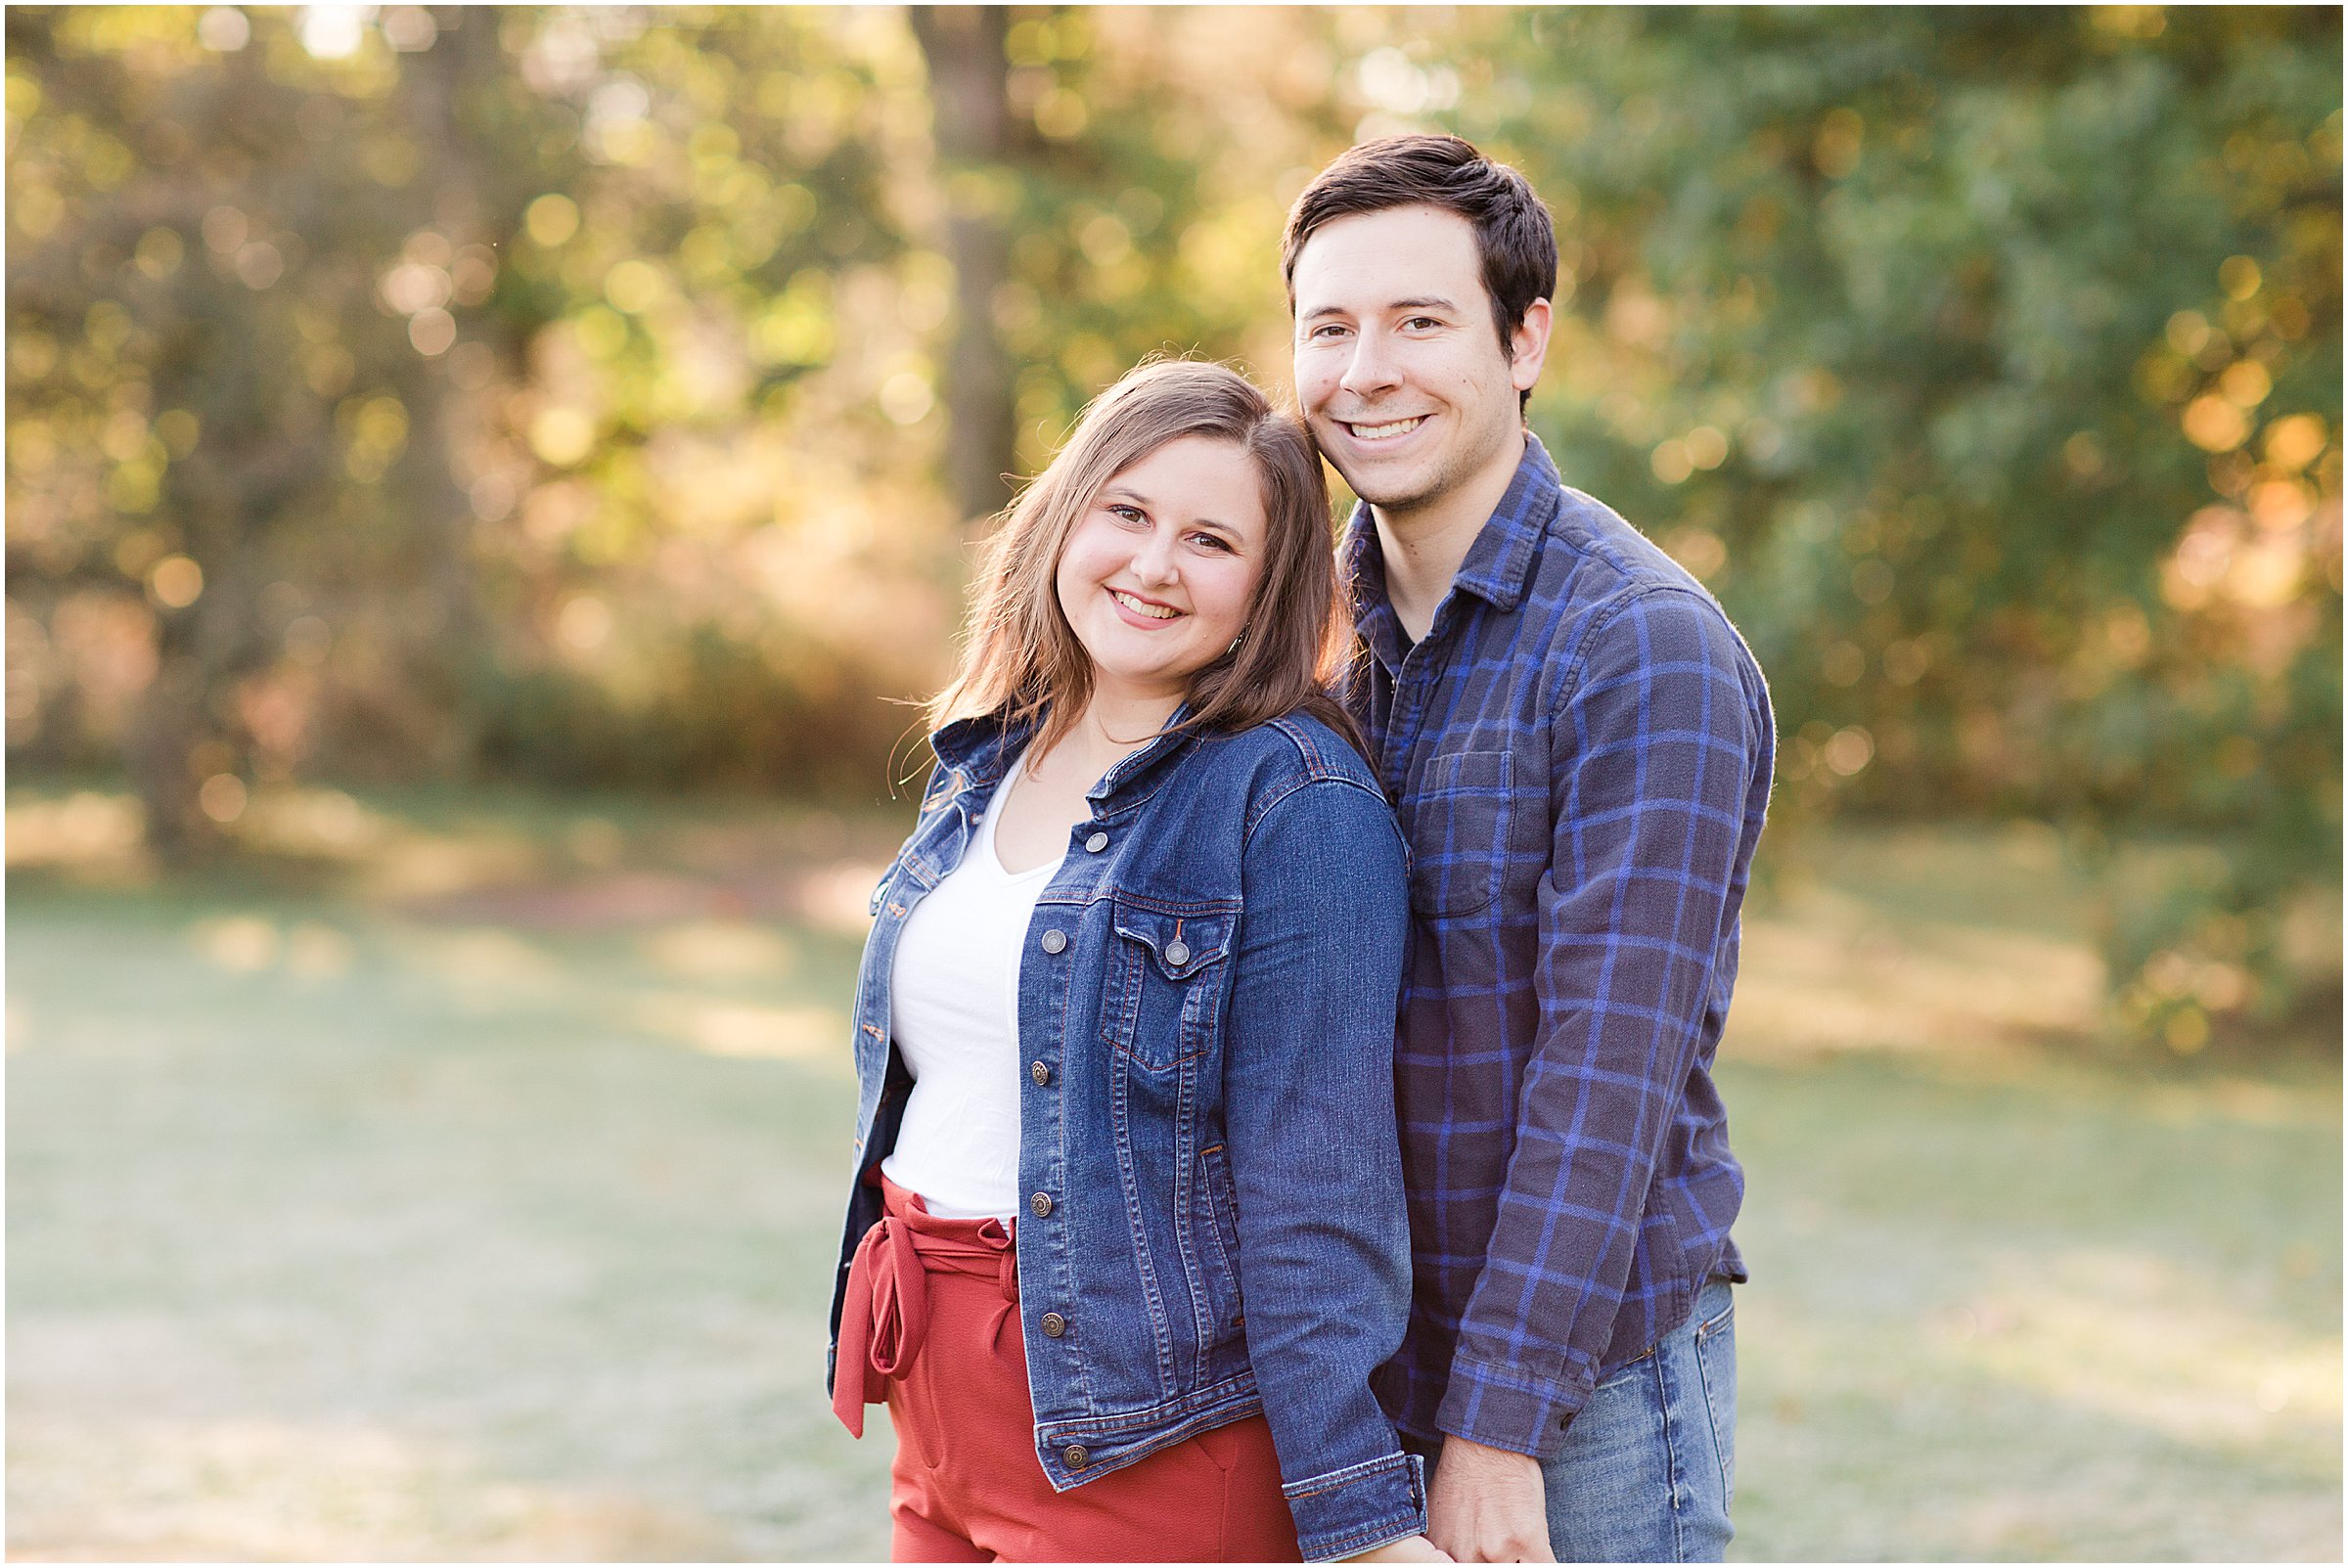 Holliday Park Engagement Session by Sami Renee_0004.jpg